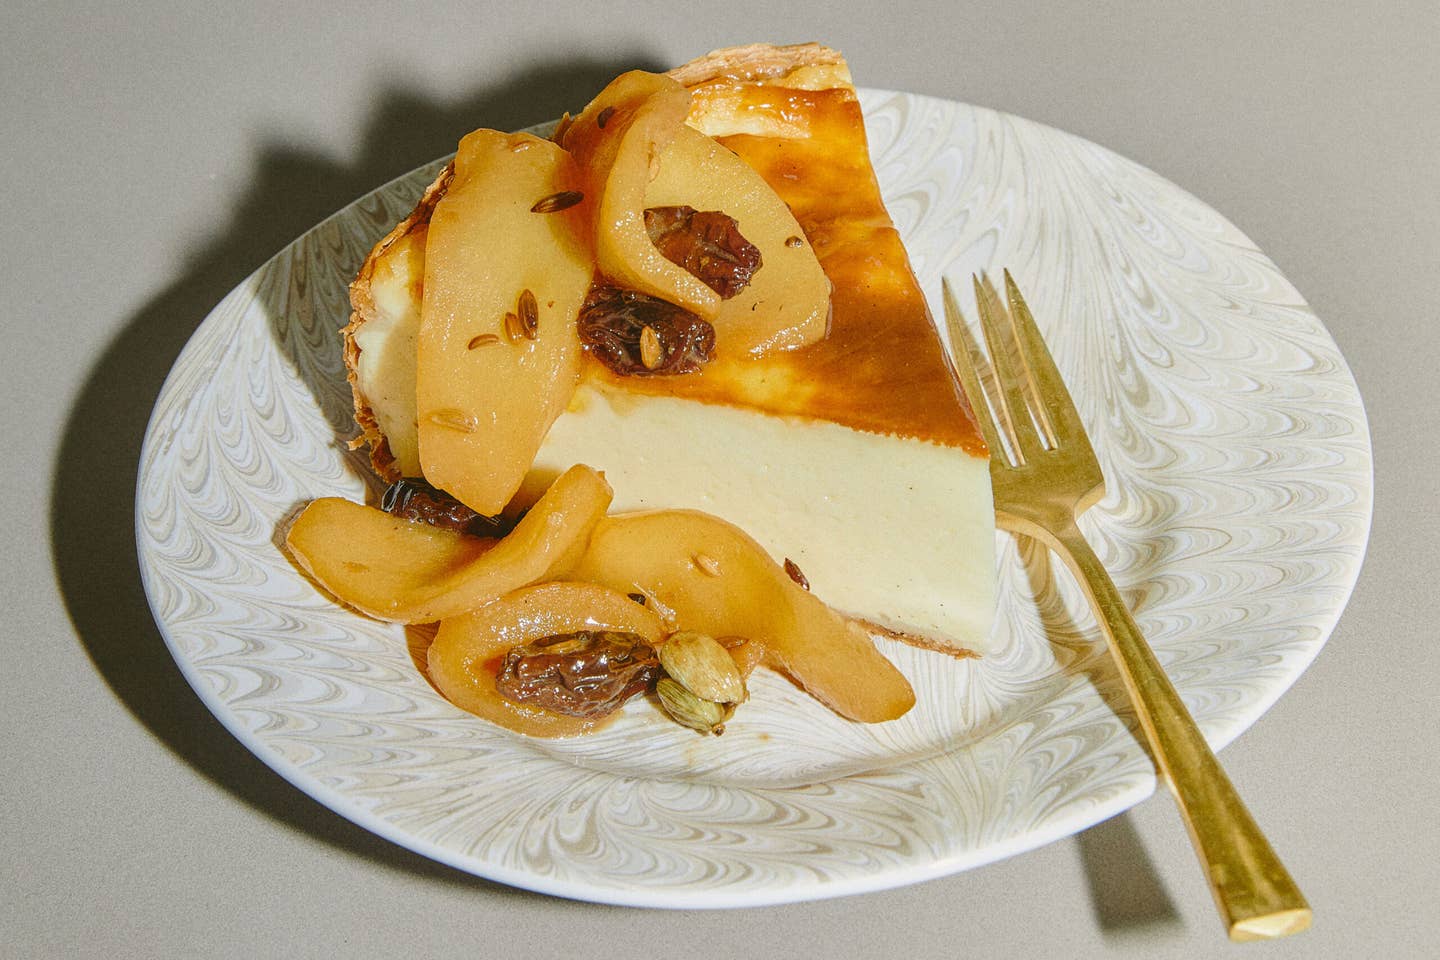 Parisian Flan with Cardamom-Apple Compote